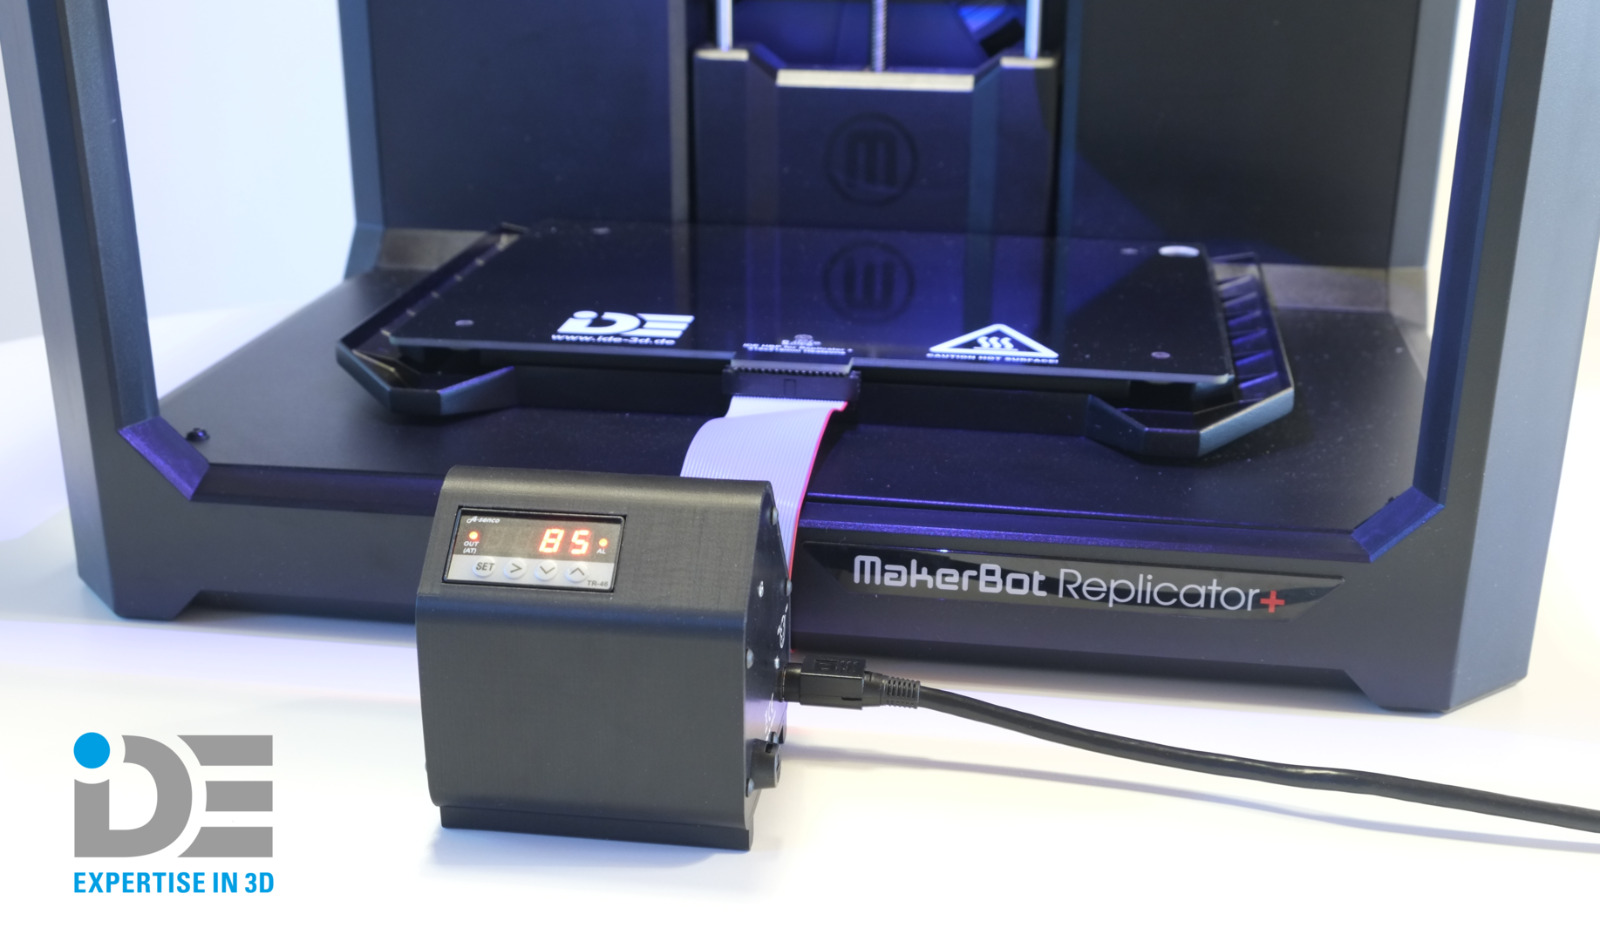 IDE HBP system for the MakerBot Replicator+ heated build platform